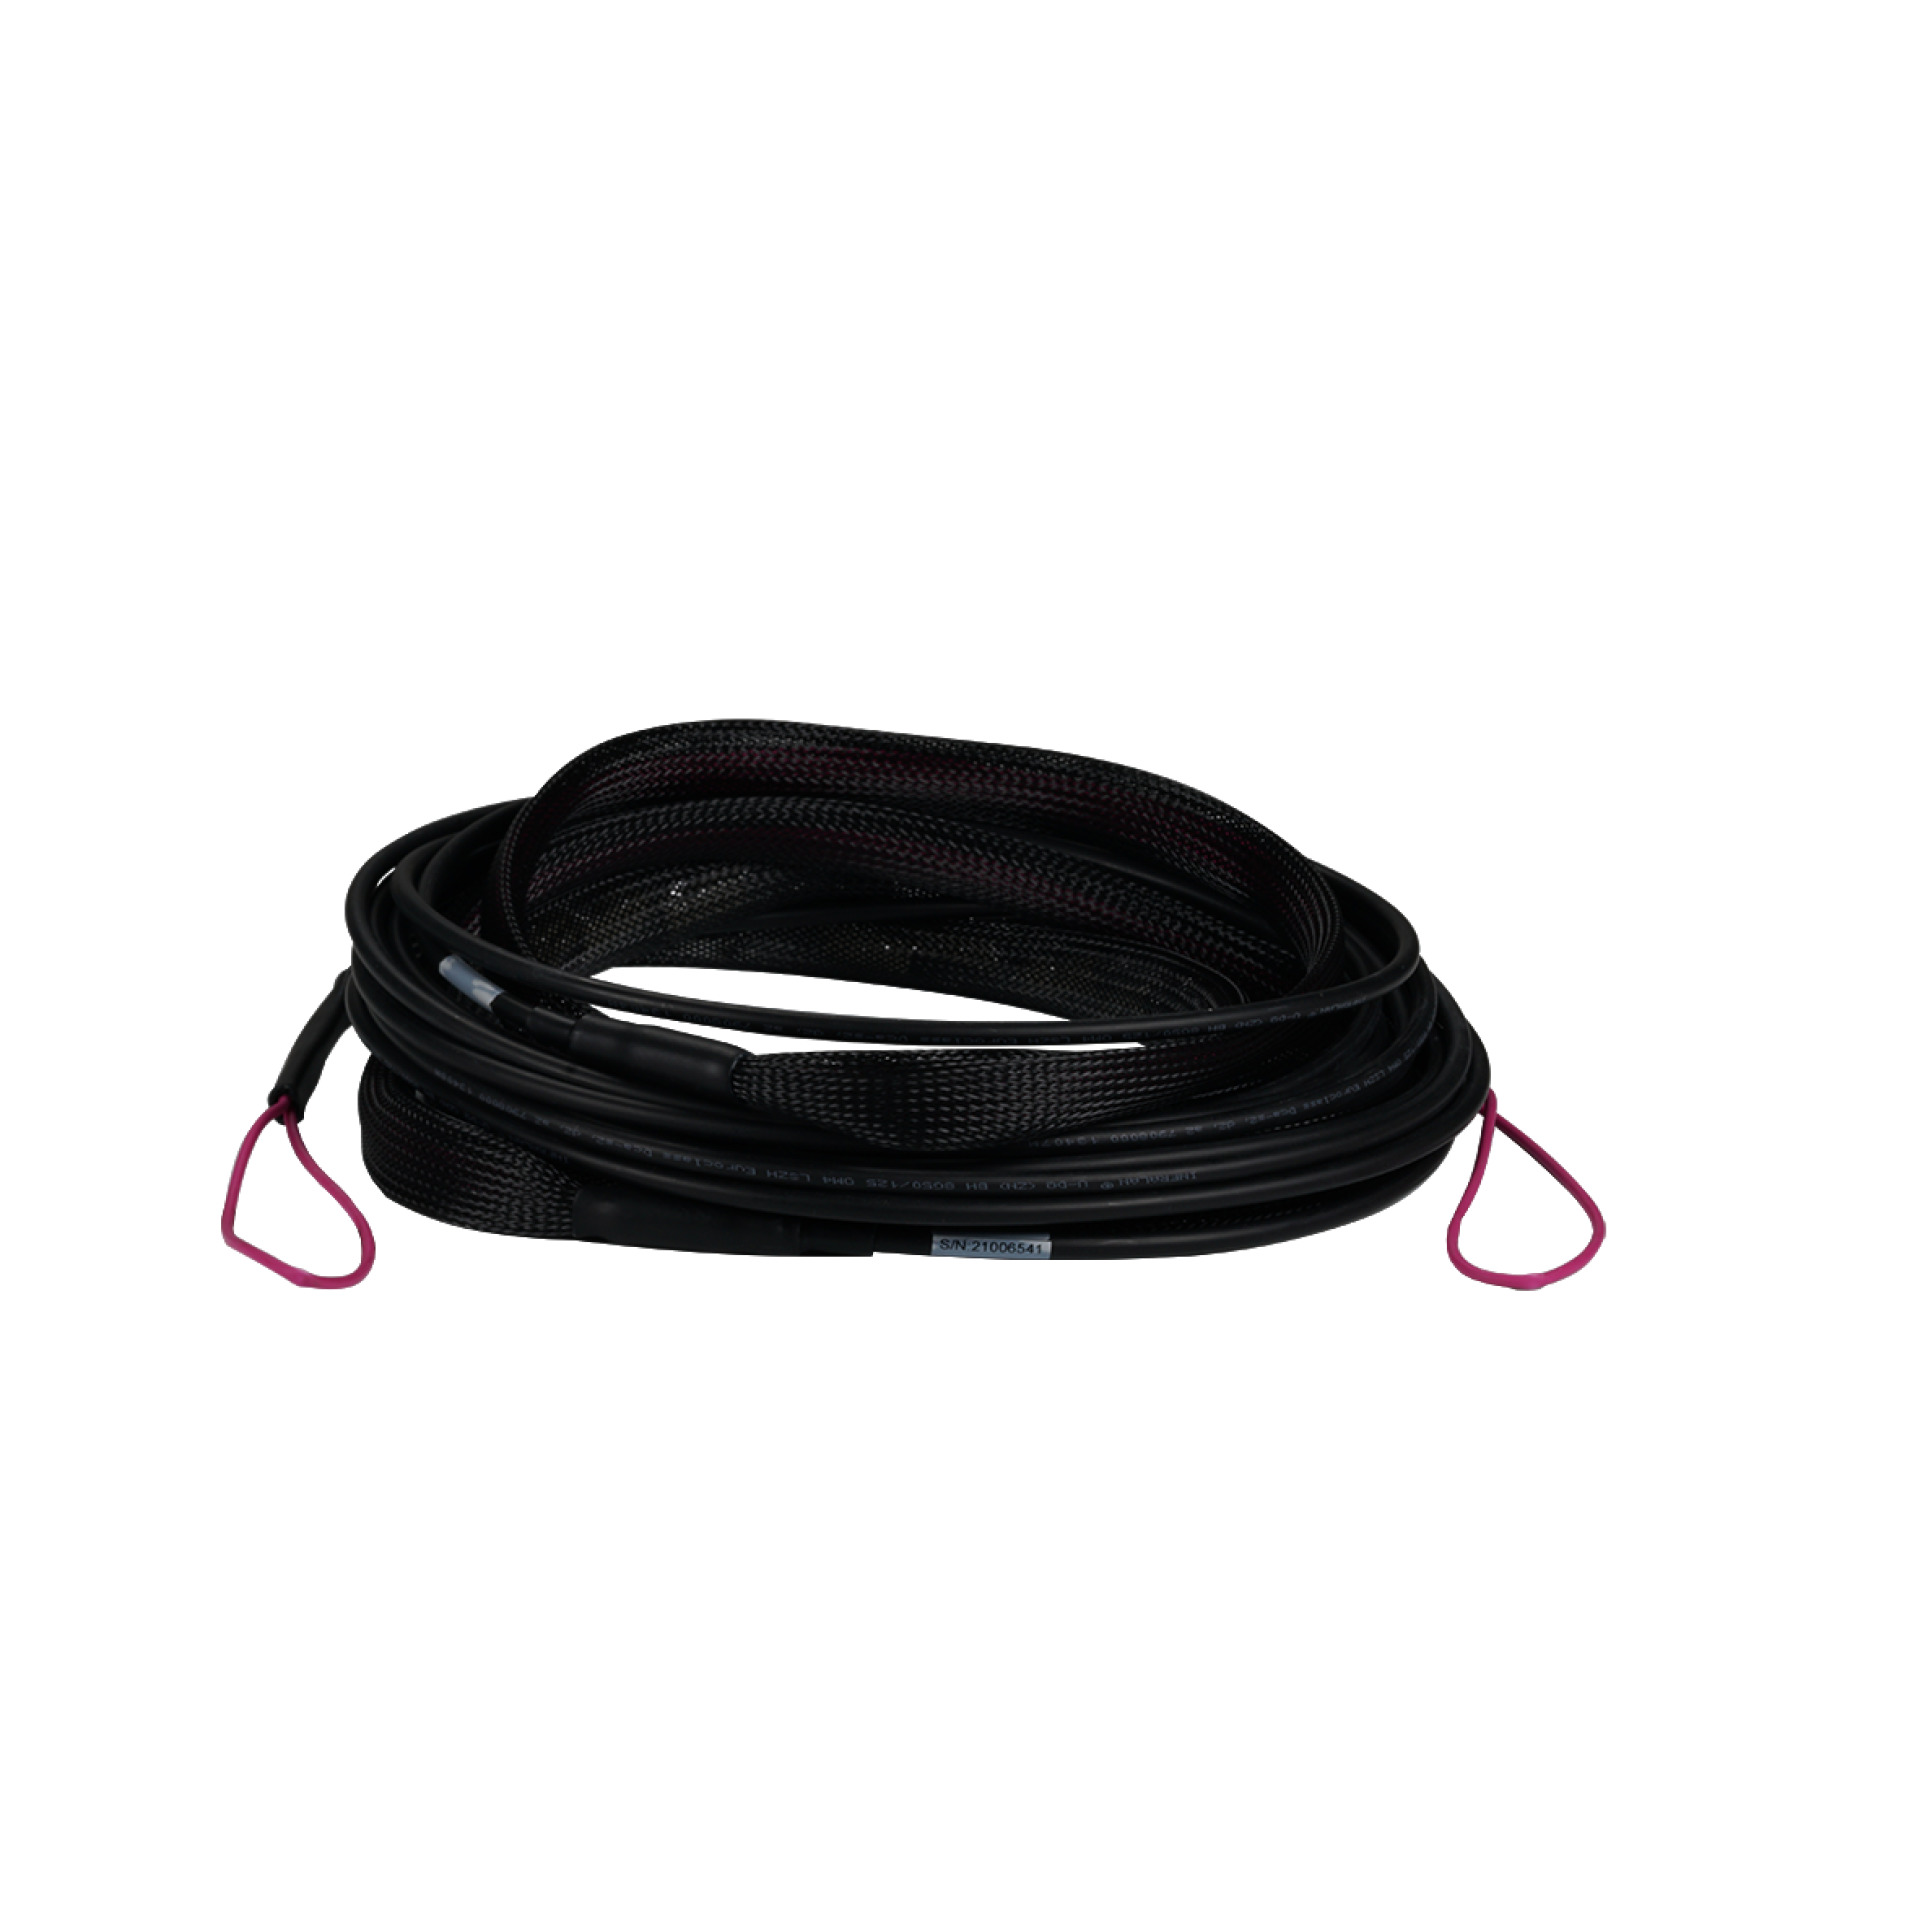 Trunk cable U-DQ(ZN)BH 4G 50/125, SC/SC OM4 70m